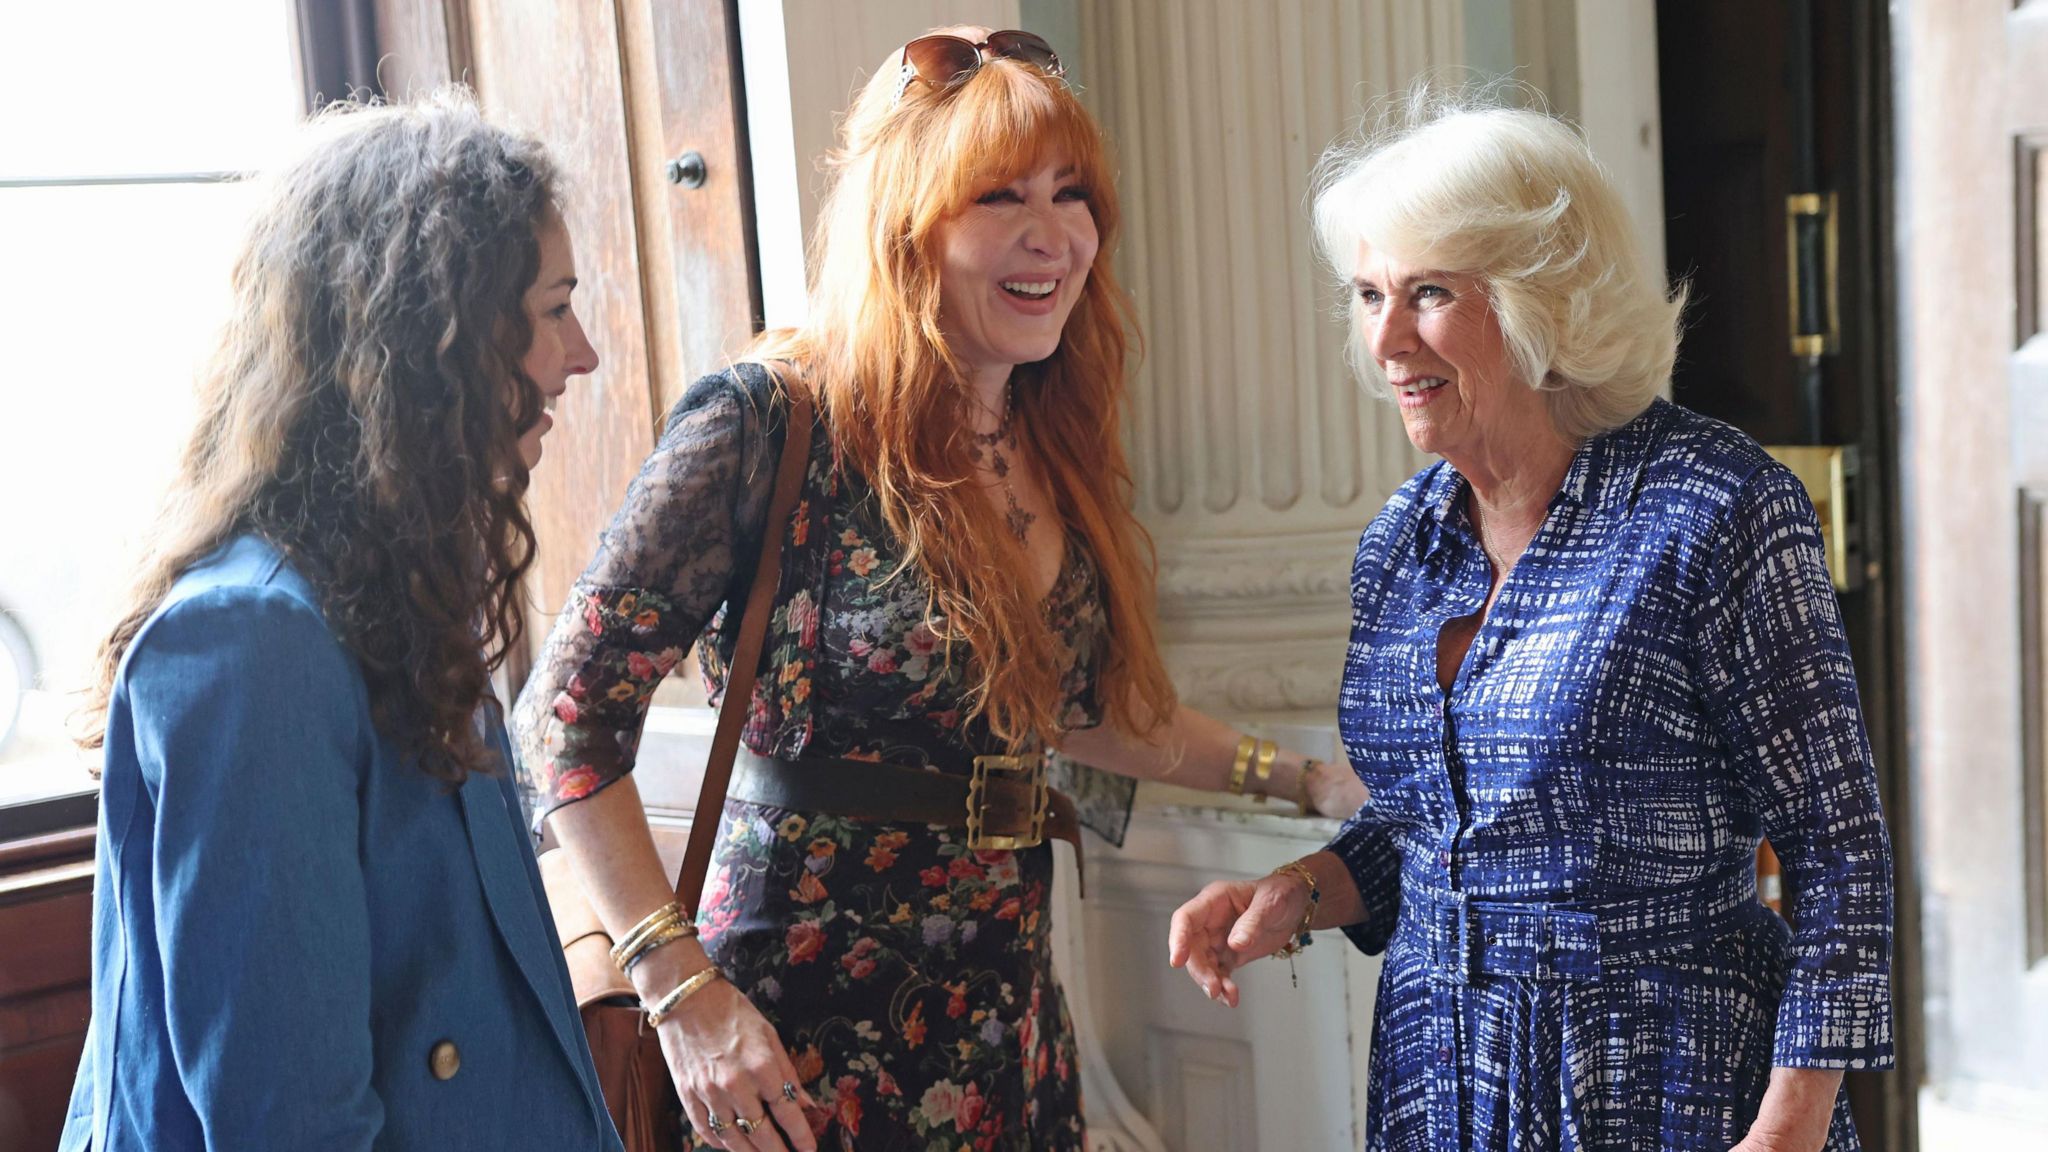 The Marchioness of Cholmondeley, Rose Hanbury, and beauty entrepreneur, Charlotte Tilbury, chatting with Queen Camilla 